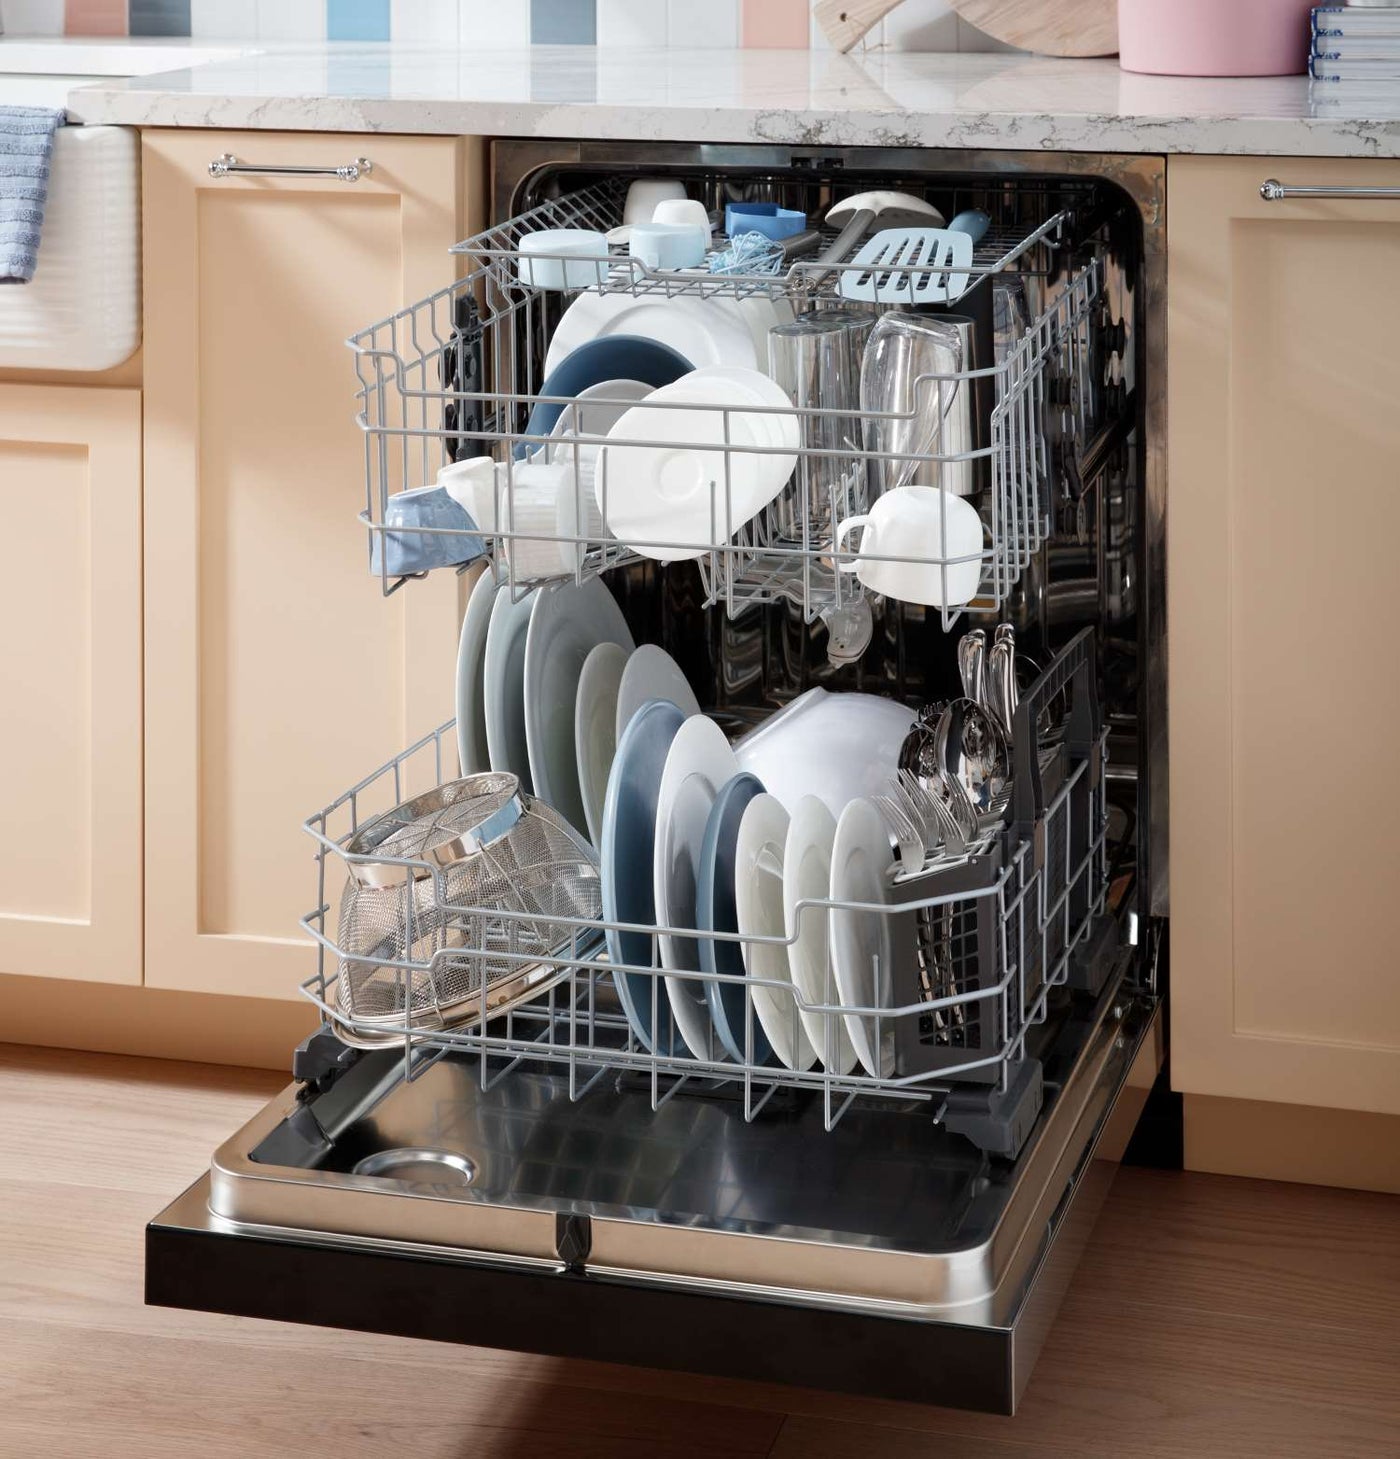 GE 24" Fingerprint Resistant Stainless Steel Top Control Dishwasher with Stainless Steel Interior and Third Rack - GDT650SYVFS